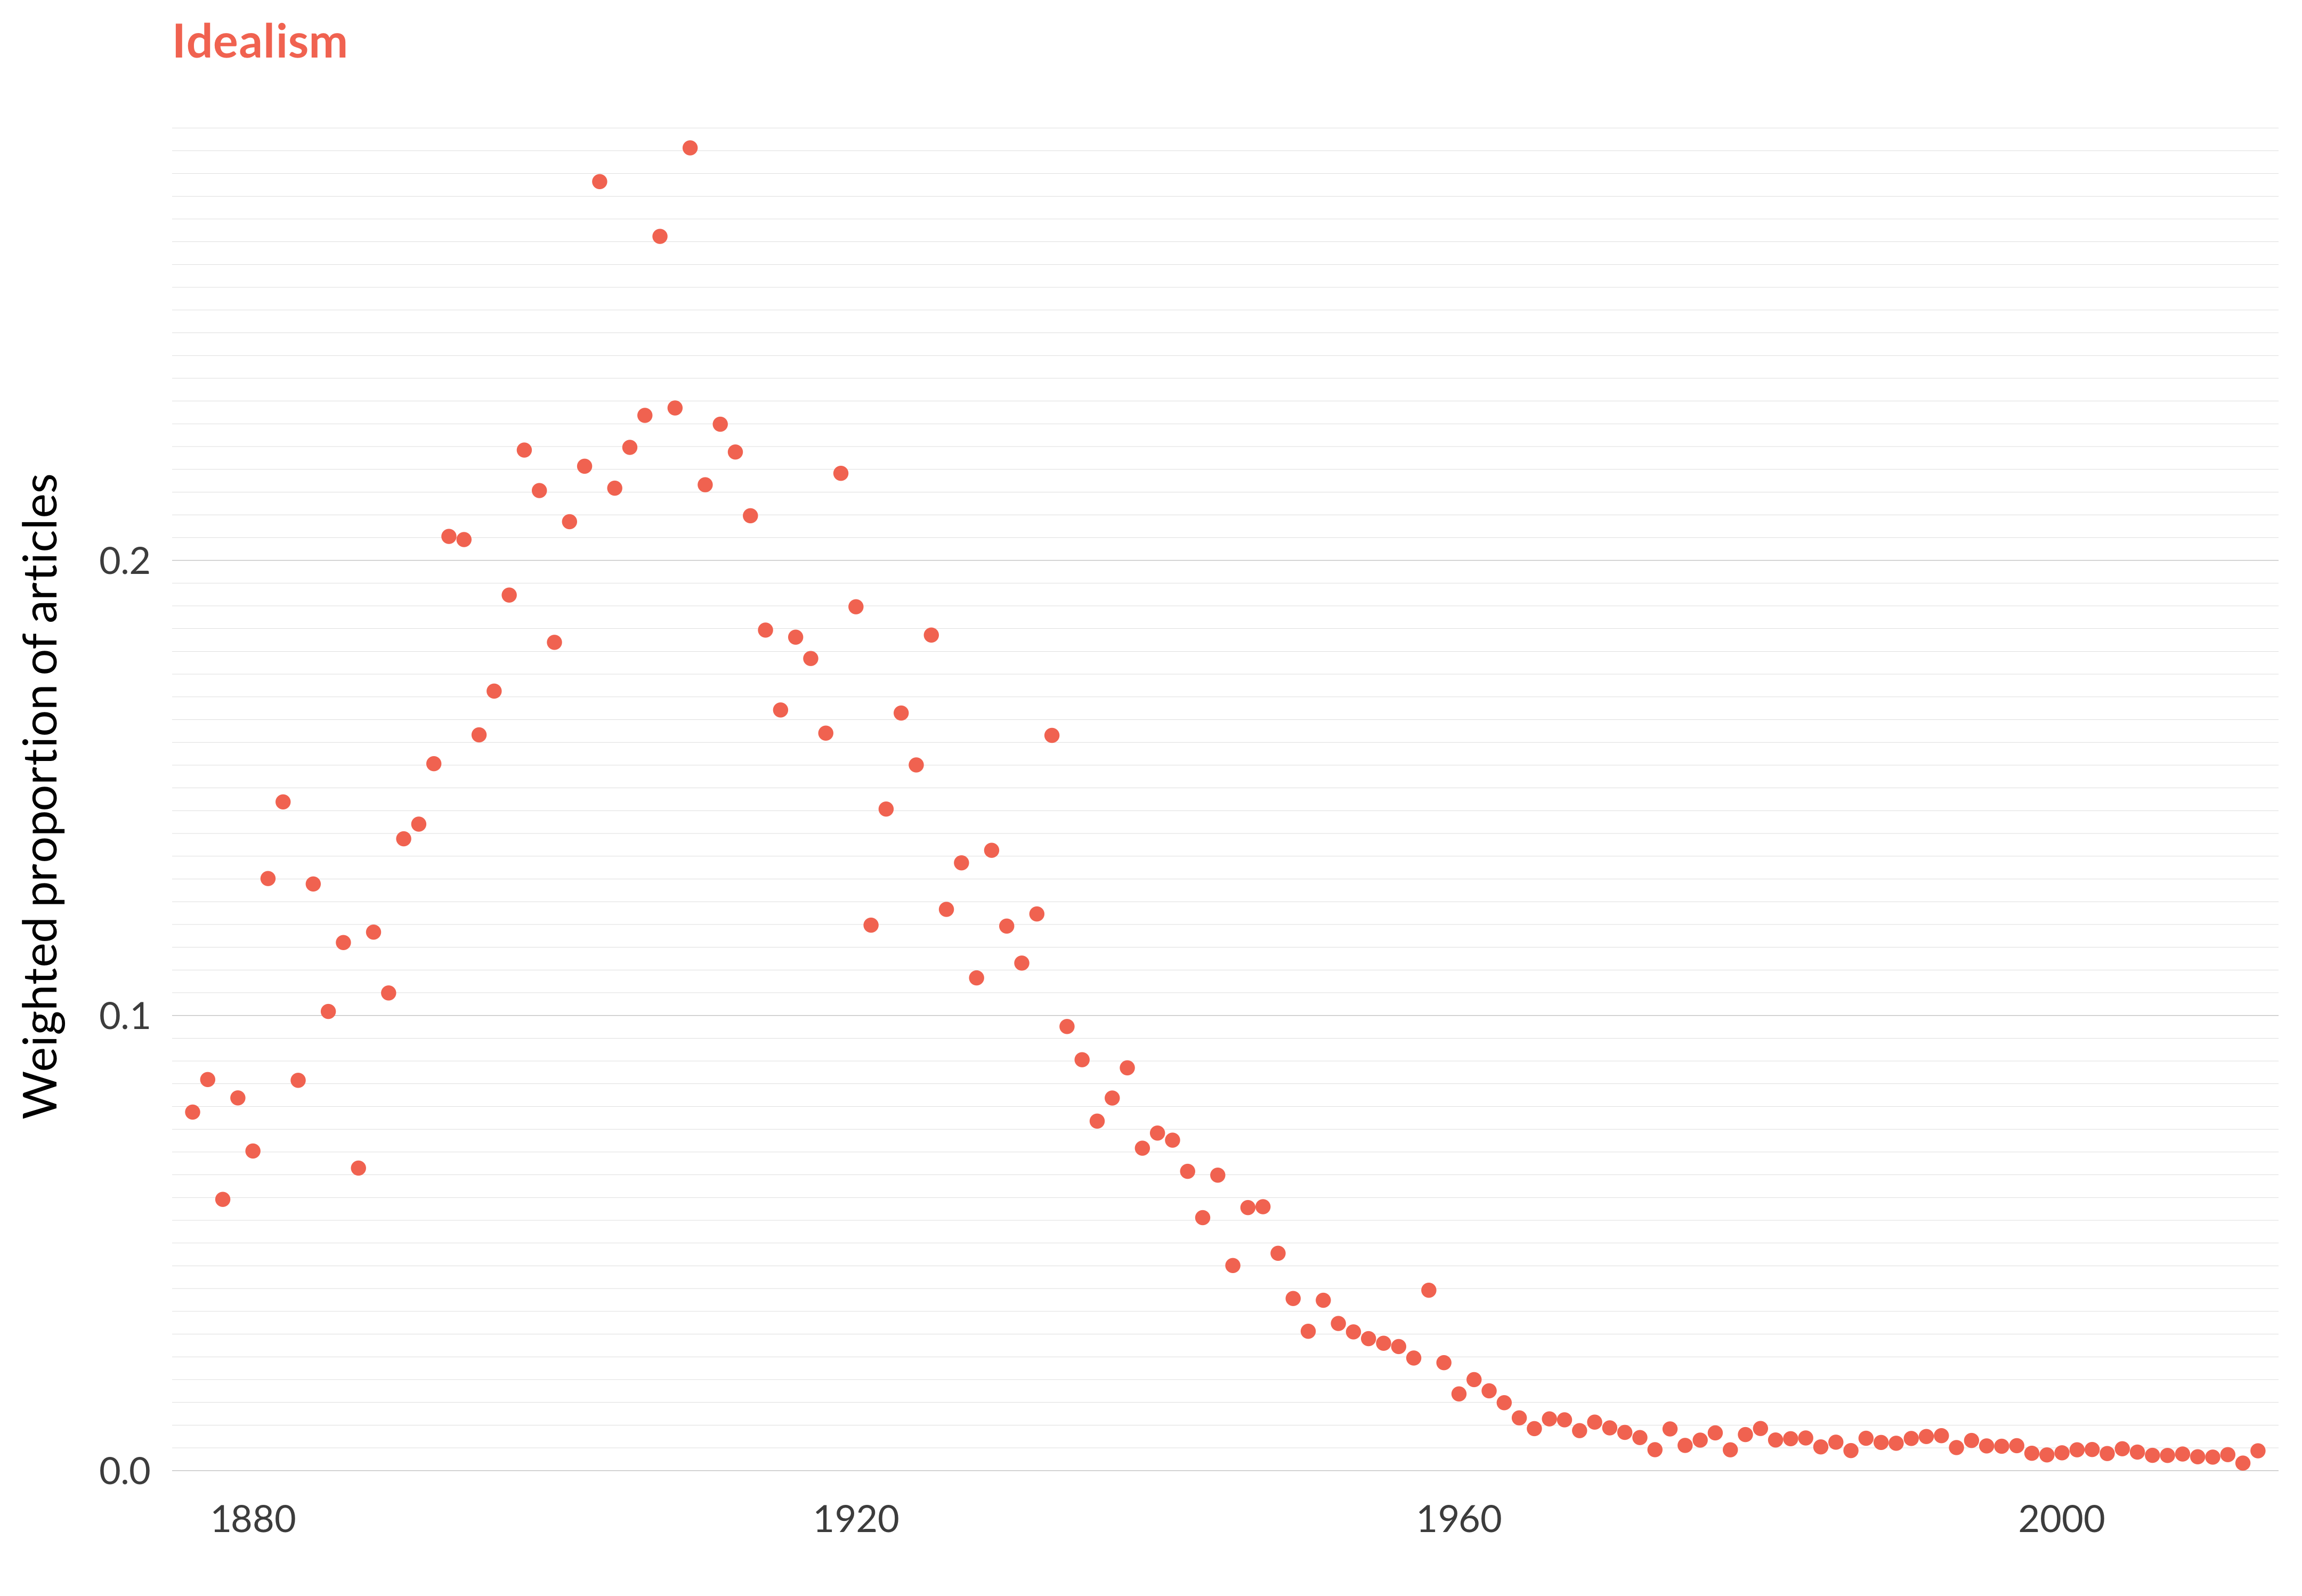 A scatterplot showing which proportion of articles each year are in the idealismtopic. The x-axis shows the year, the y-axis measures the proportion of articles each year in this topic. There is one dot per year. The highest value is in 1909 when 29.1% of articles were in this topic. The lowest value is in 2012 when 0.2% of articles were in this topic. The full table that provides the data for this graph is available in Table A.2 in Appendix A.